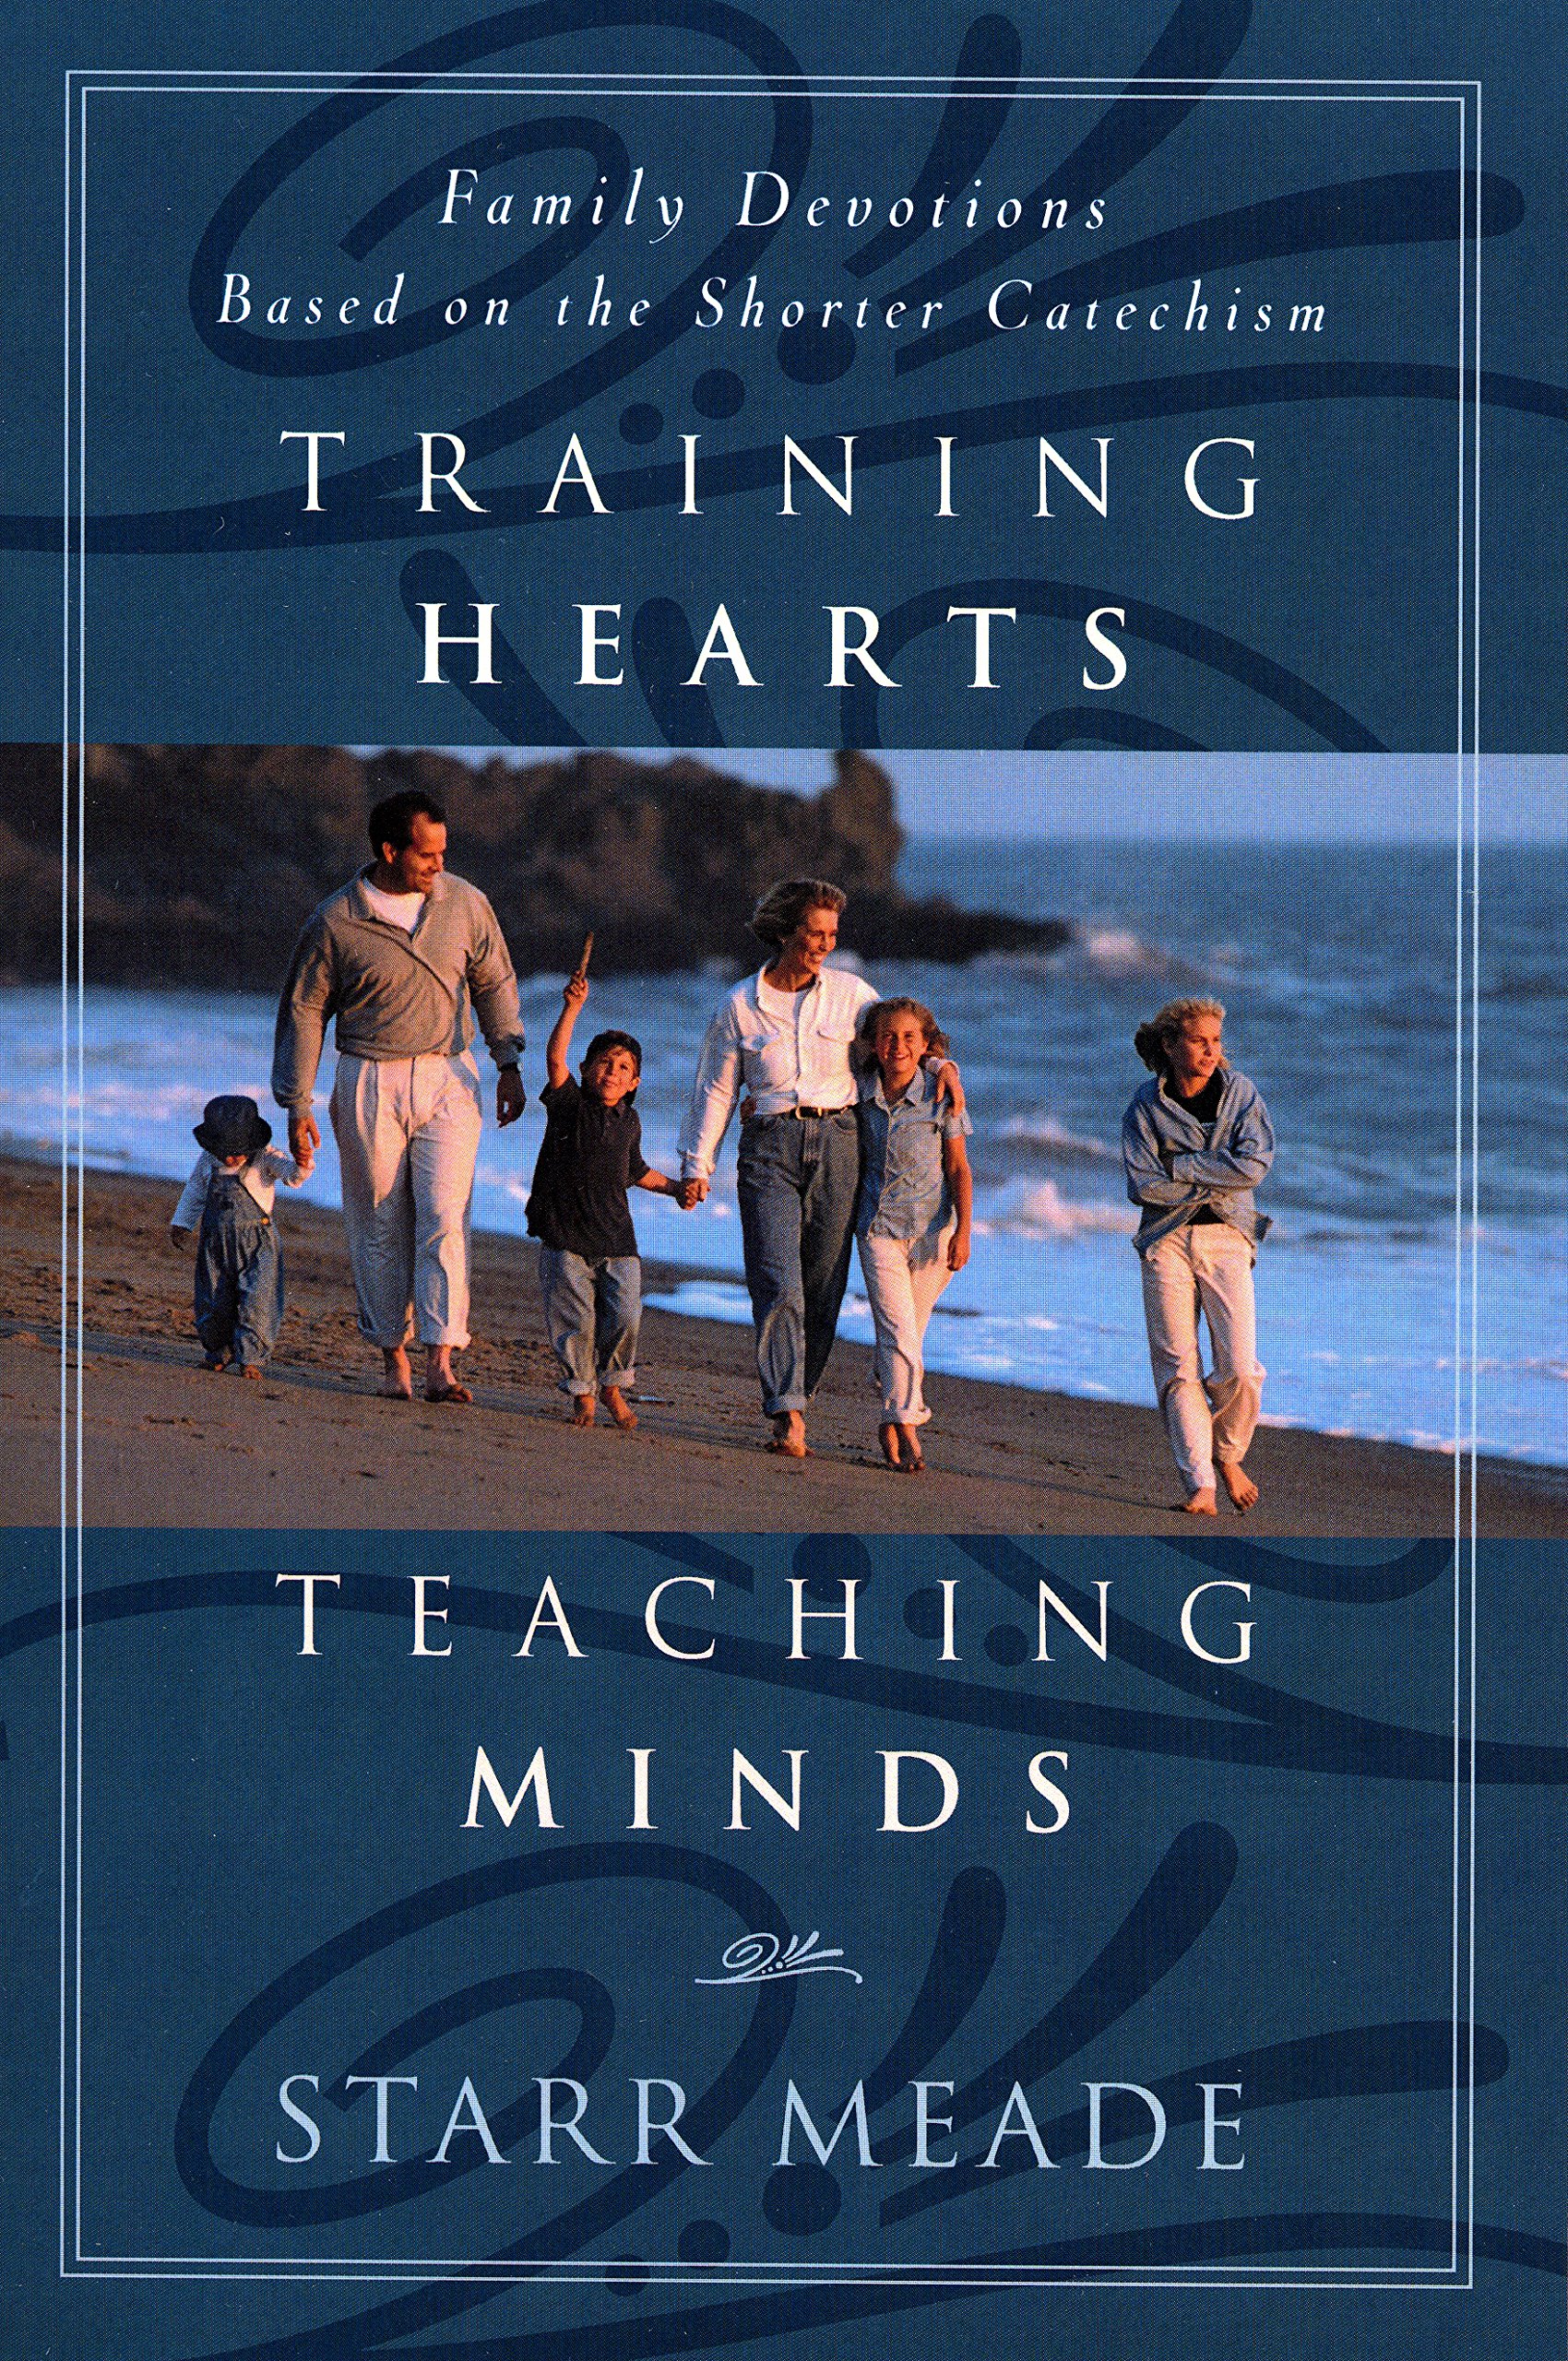 Comforting Hearts, Teaching Minds by Starr Meade